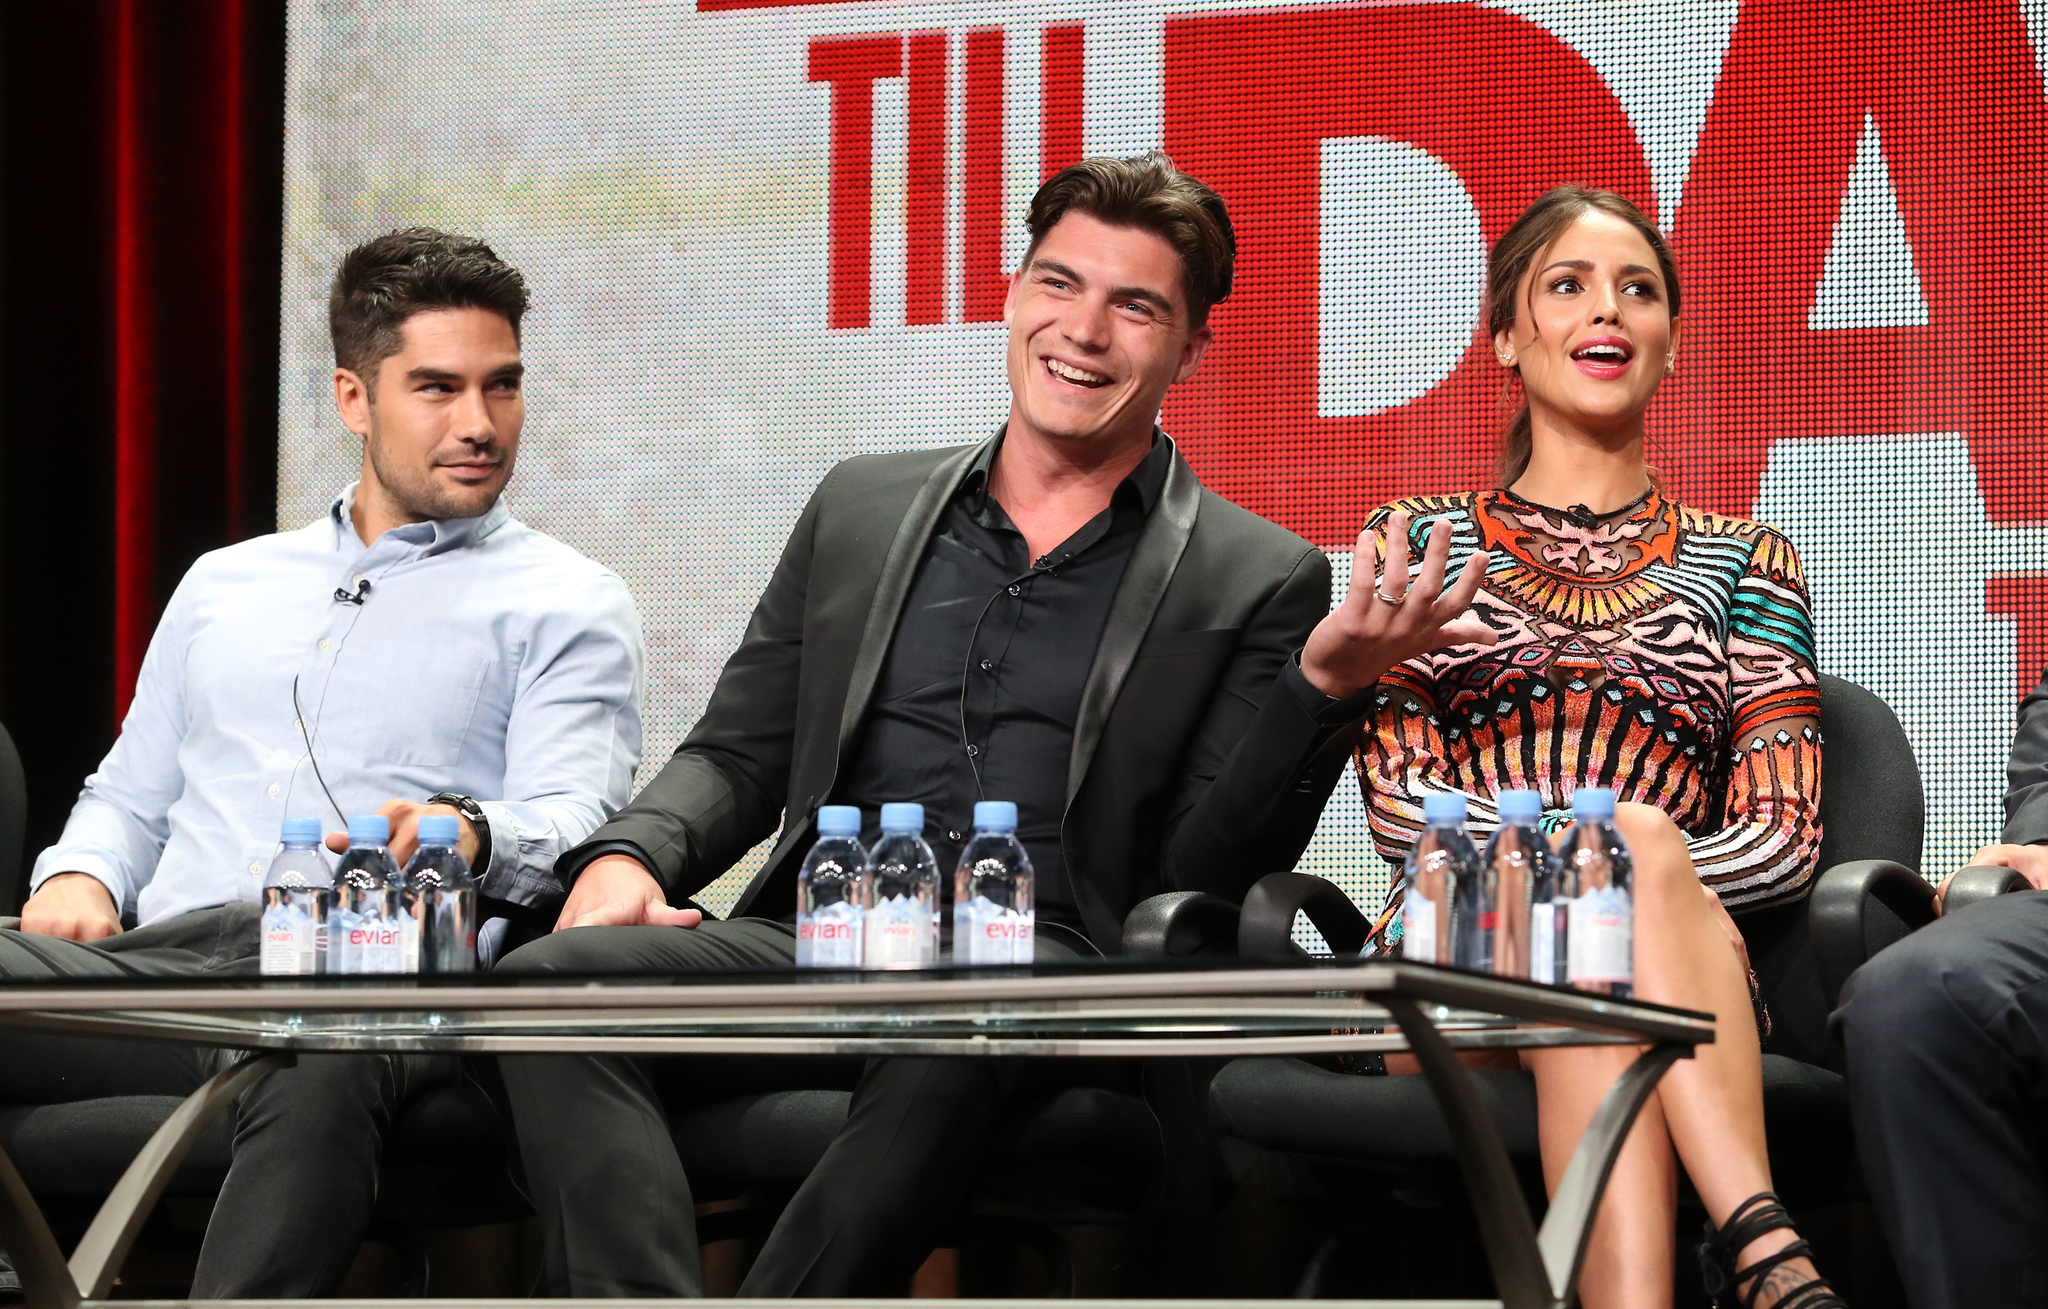 Zane Holtz, D.J. Cotrona and Eiza González at event of From Dusk Till Dawn: The Series (2014)